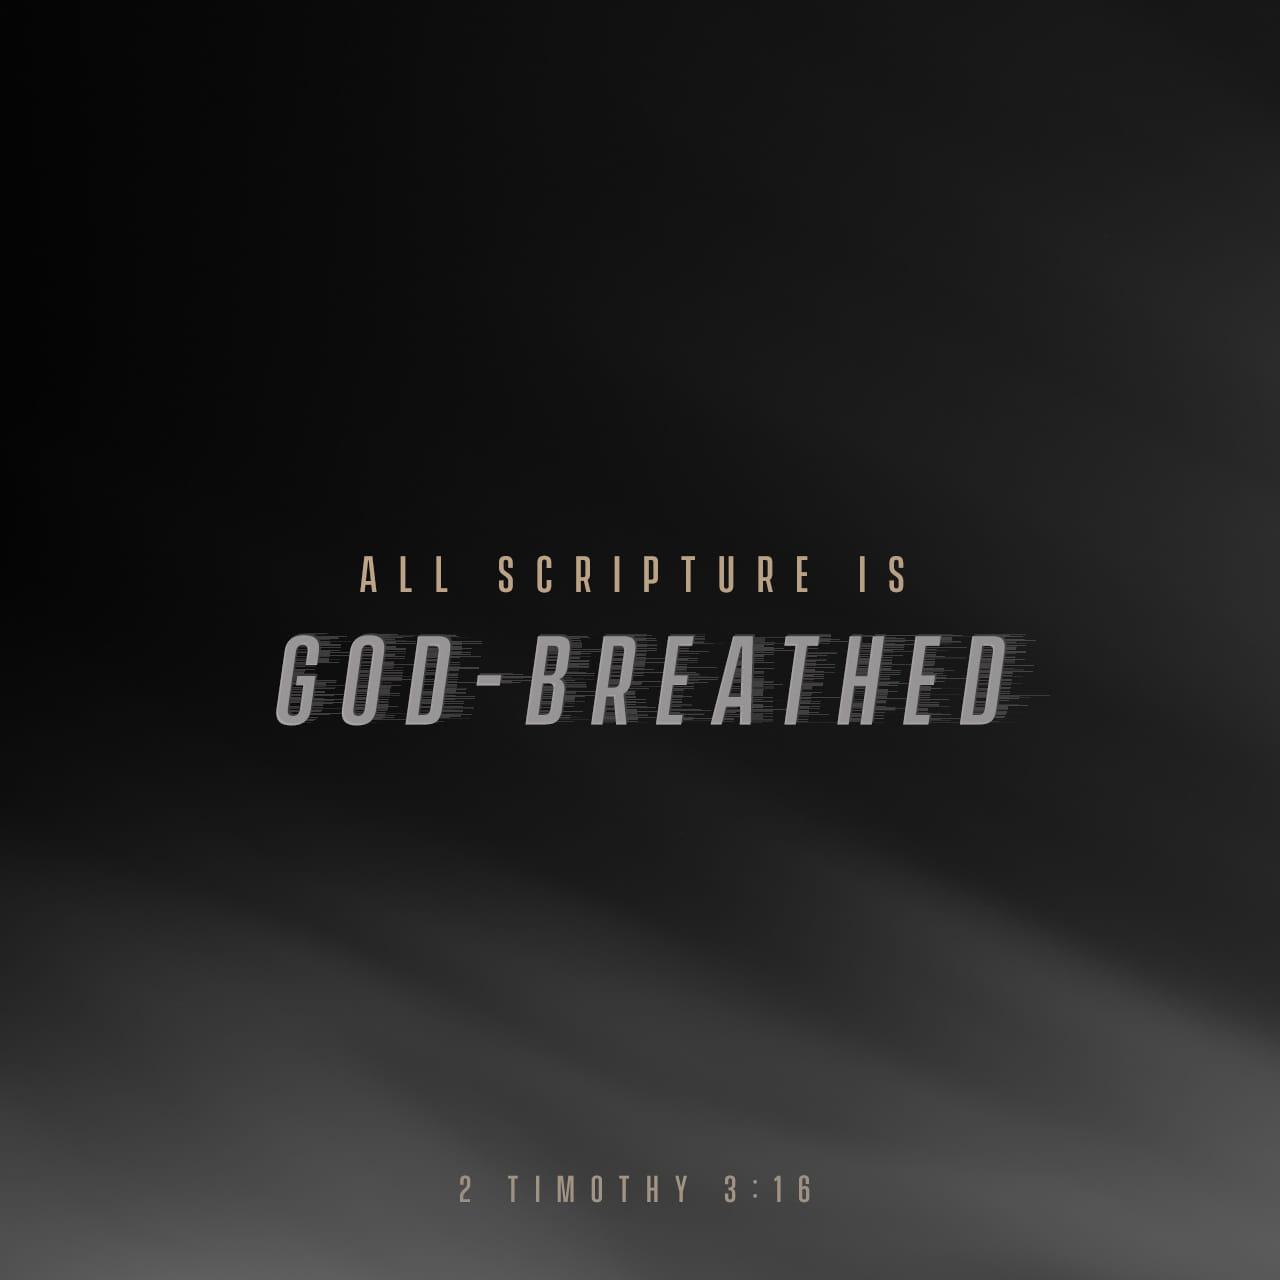 Bible Verse of the Day - day 83 - image 13764 (2 Timothy 3:16)